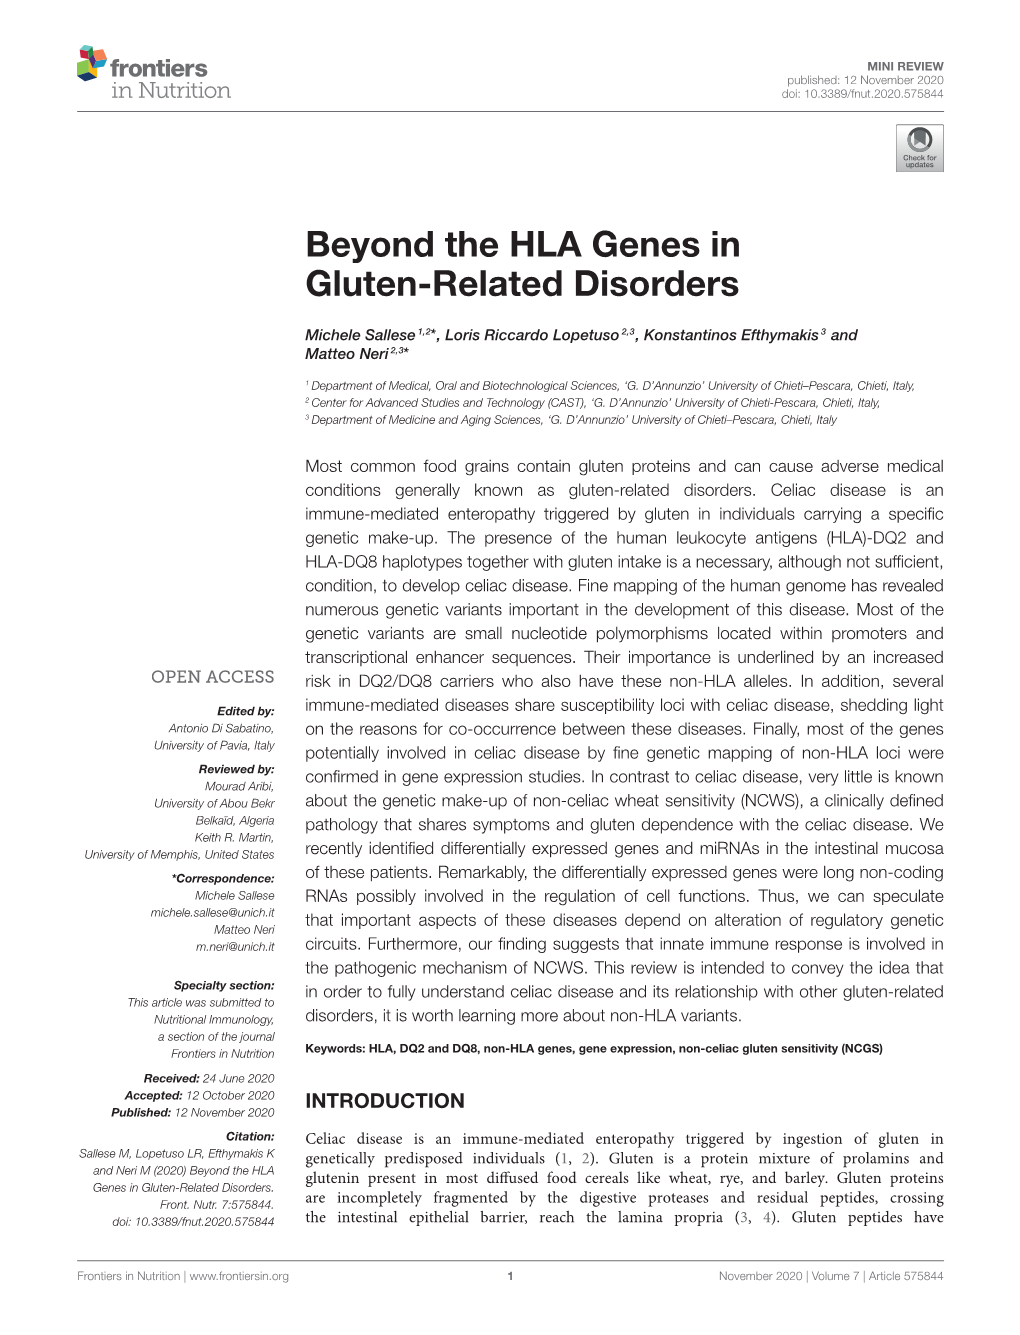 Beyond the HLA Genes in Gluten-Related Disorders